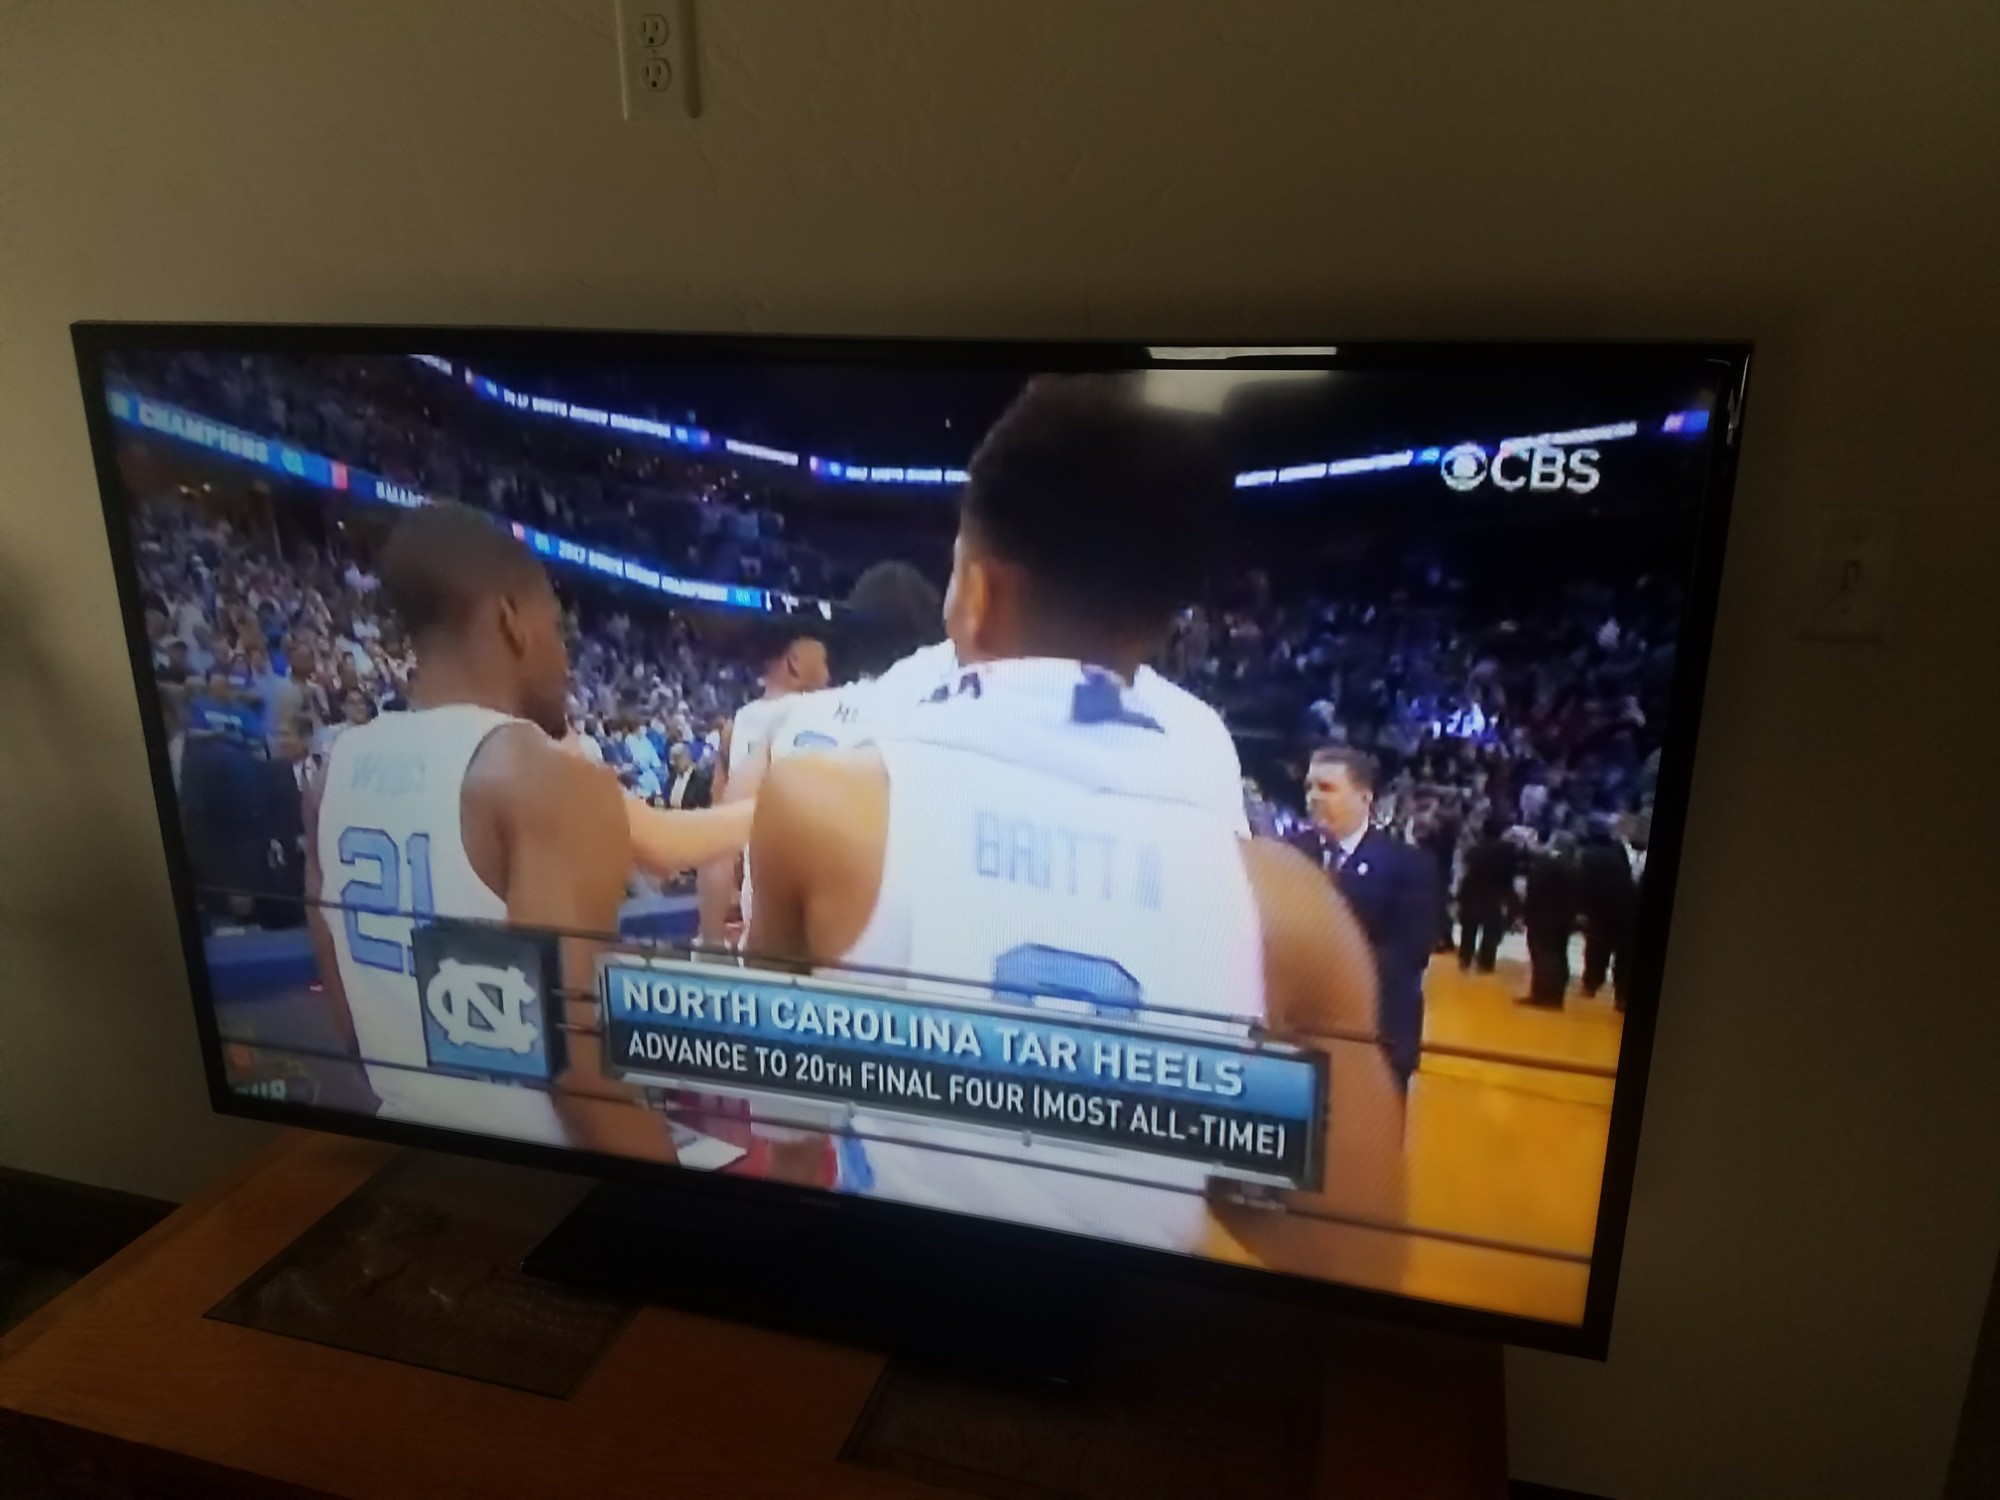 Amazing! North Carolina wins its at the buzzer, sparing me from flying Air India.